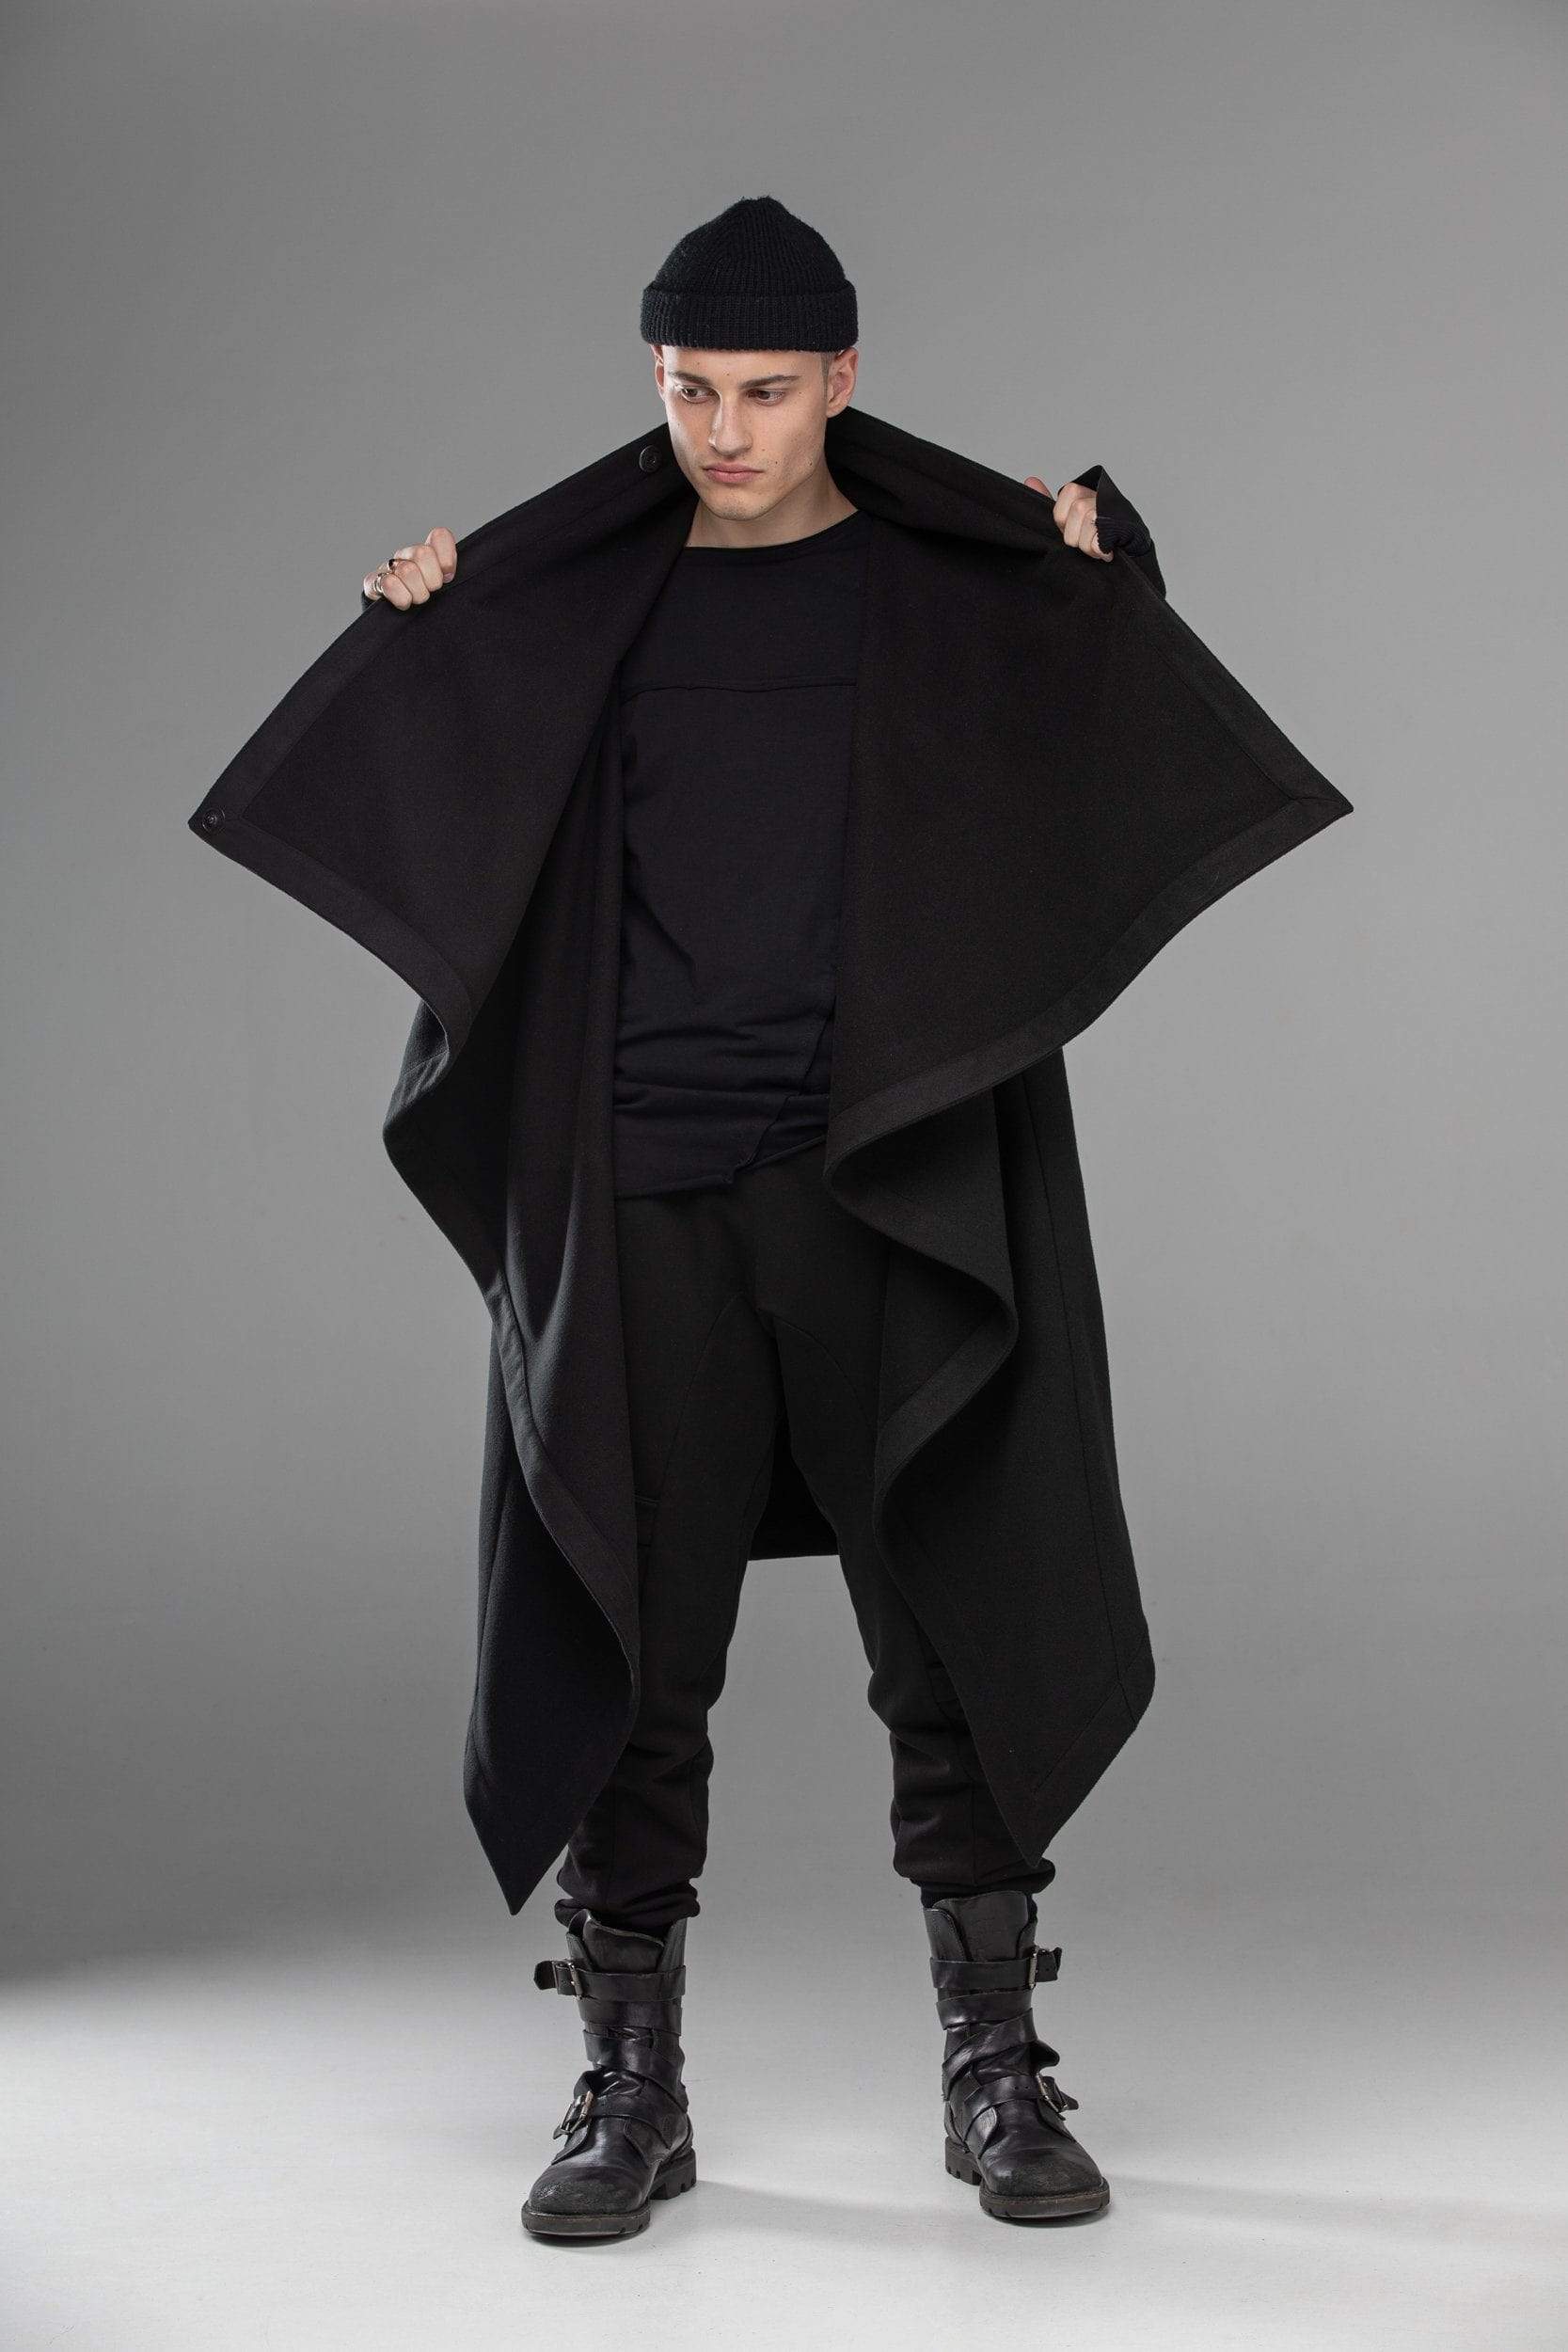 MDNT45 Coats & Jackets for Man Oversized geometric loose fit coat